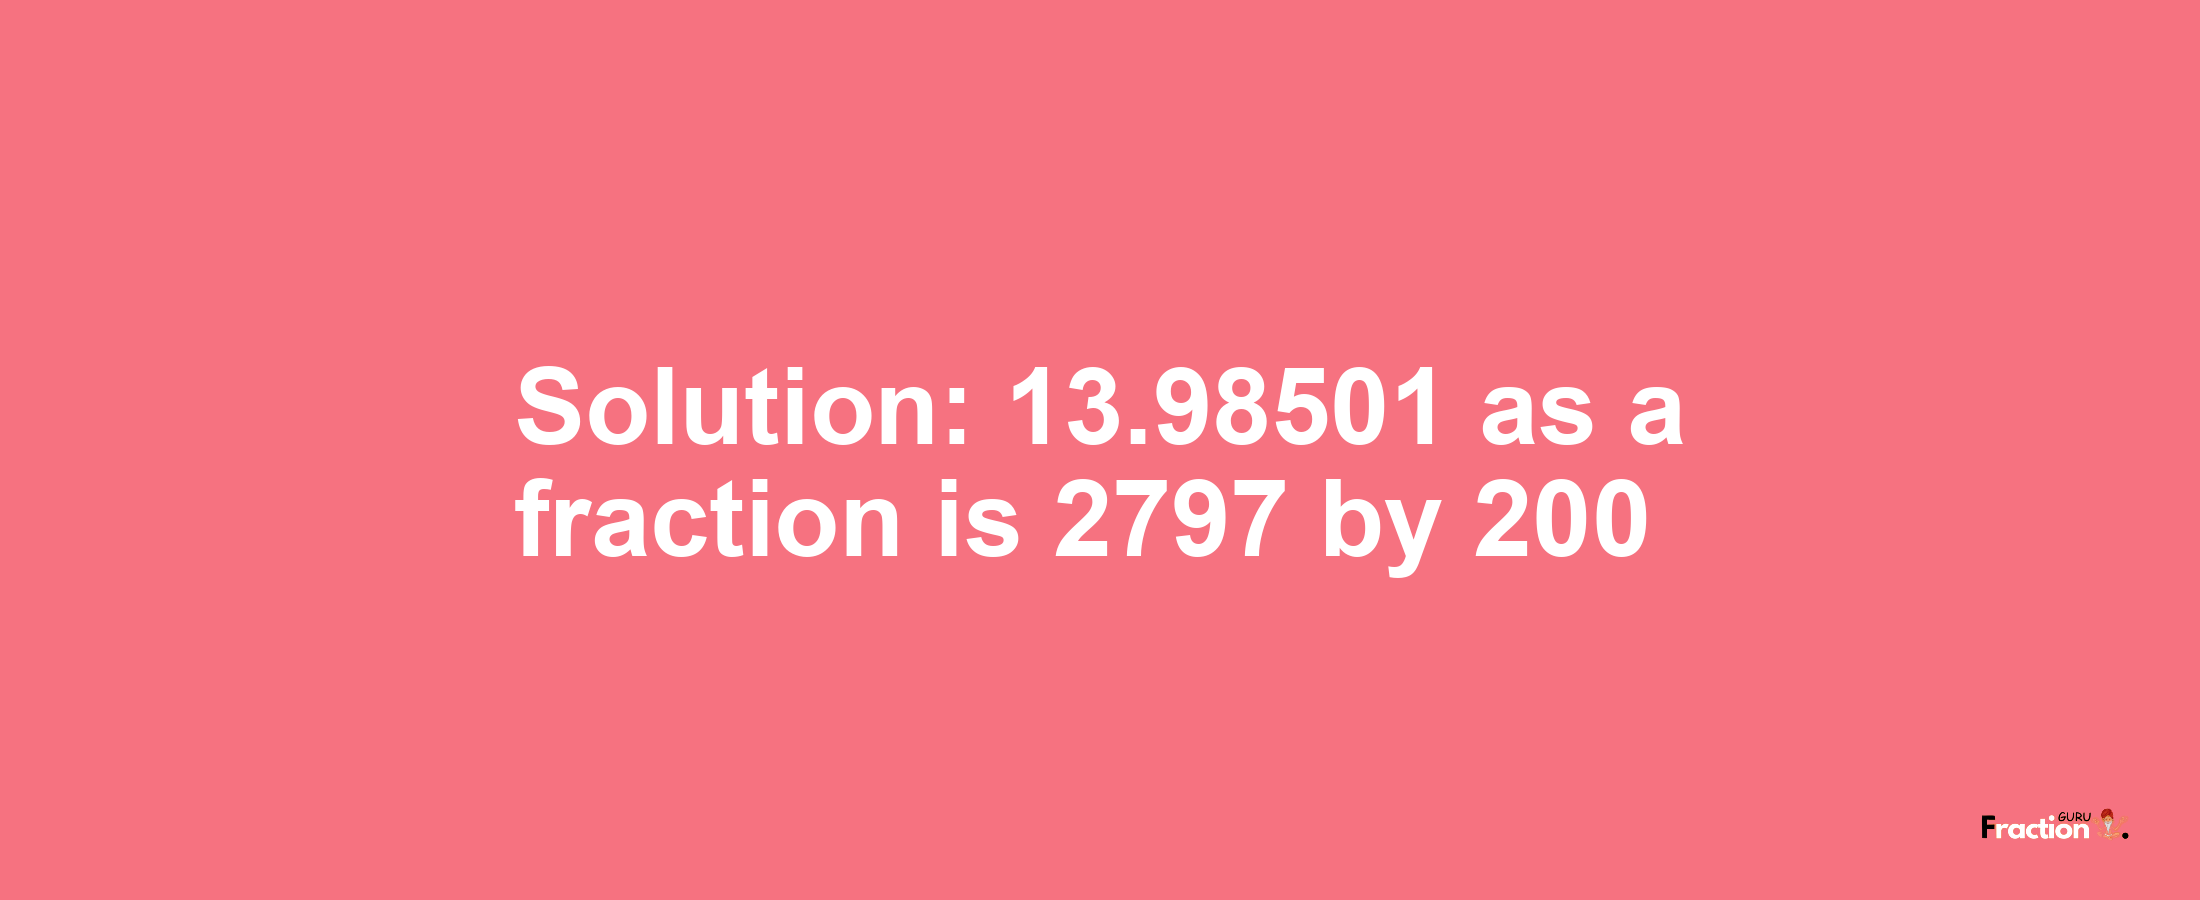 Solution:13.98501 as a fraction is 2797/200